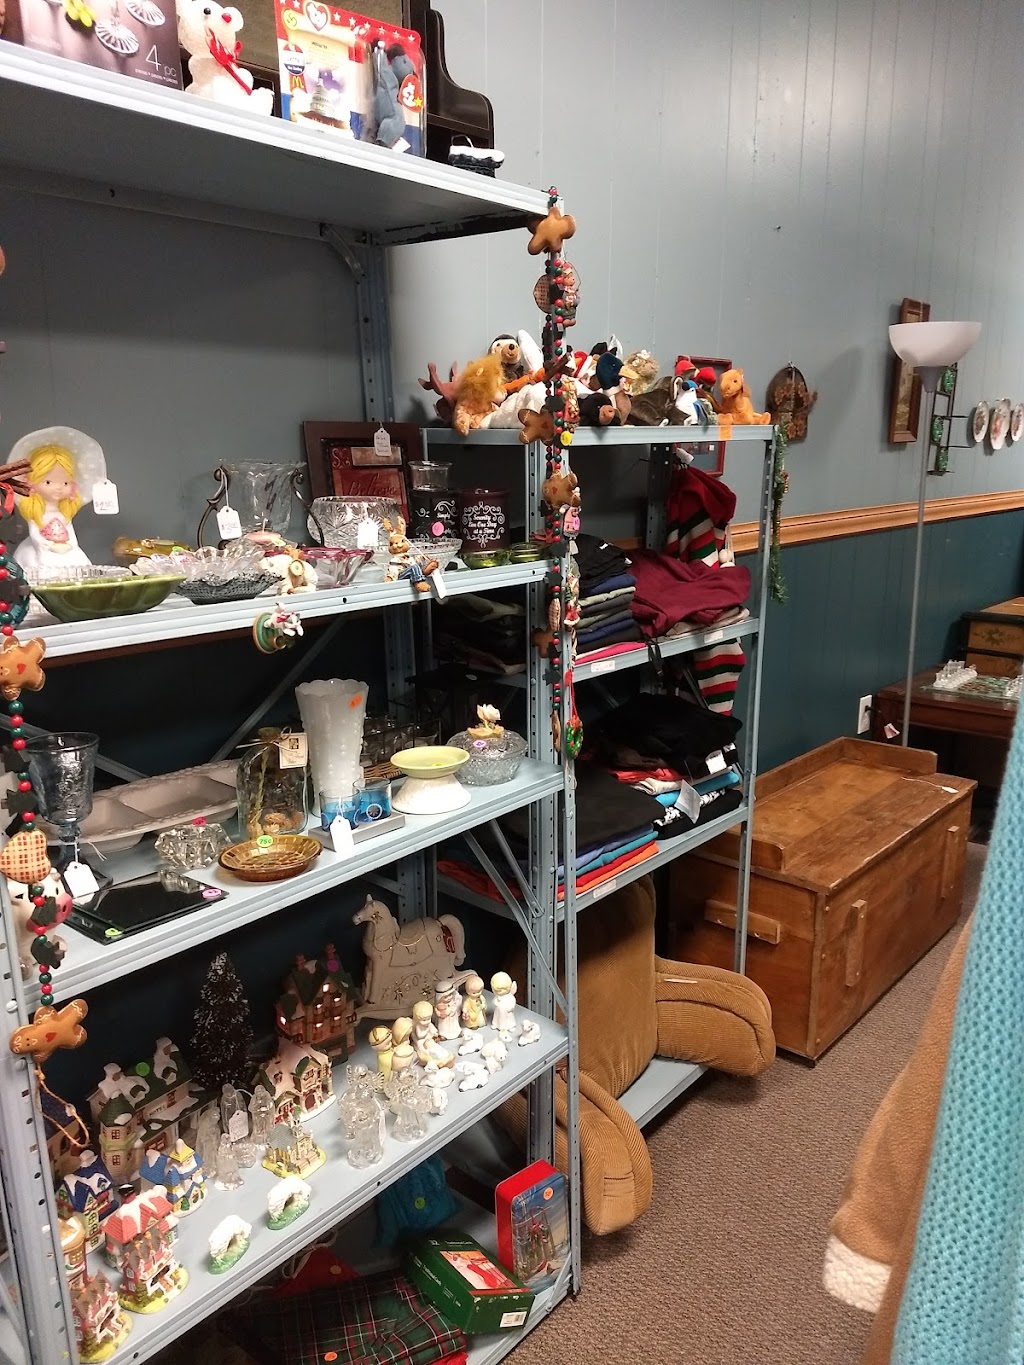 A & J Hidden Treasures | 6903 N Frontage Rd, Fairland, IN 46126 | Phone: (317) 416-3729